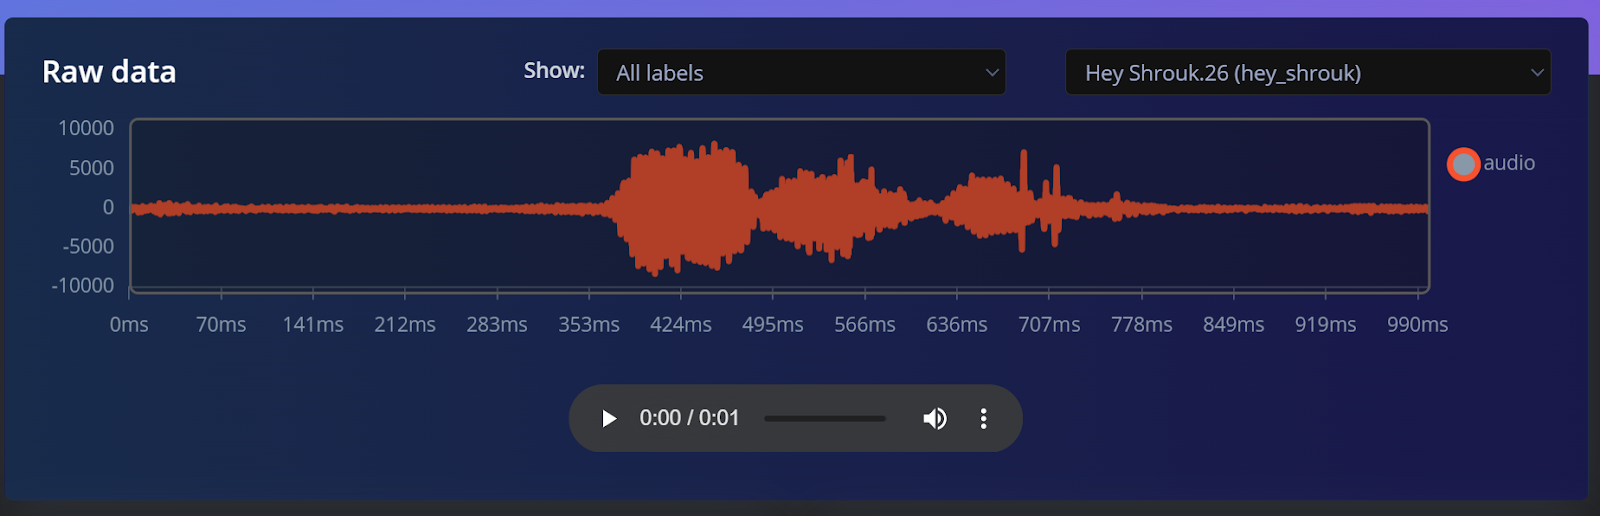 Edge Impulse interface showing raw audio data visualization for "Hey Shrouk.26" sample. The graph displays audio amplitude over time (0-990ms), with significant waveform activity visible between 350-700ms. A playback control is present below the graph.